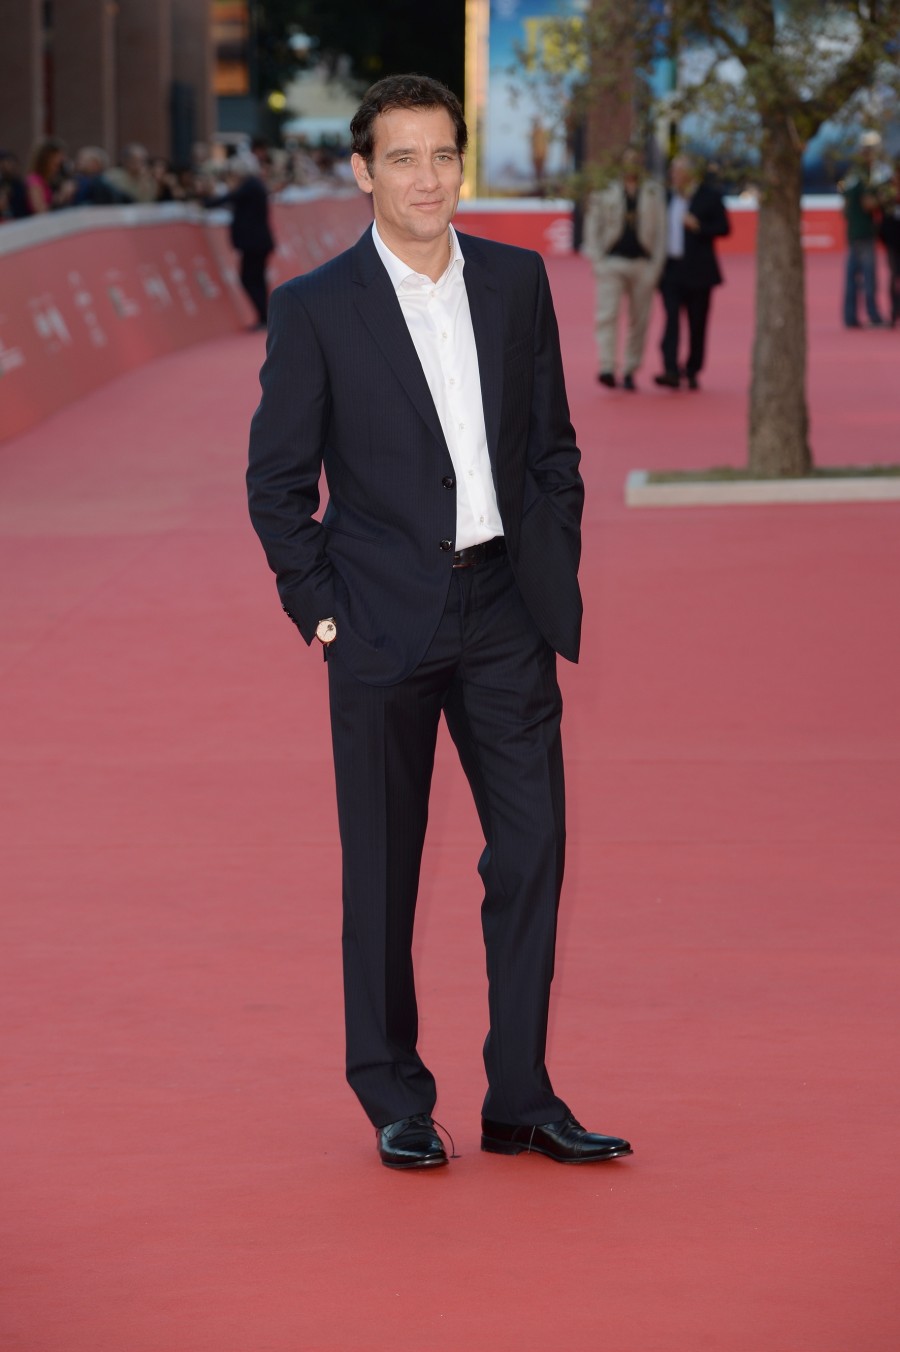 Heading to the Rome Film Festival, actor Clive Owen hit the red carpet at a screening of his new television series 'The Knick'. For the special event, Owen was outfitted by Italian label Giorgio Armani, wearing a navy suit with a pristine white dress shirt.